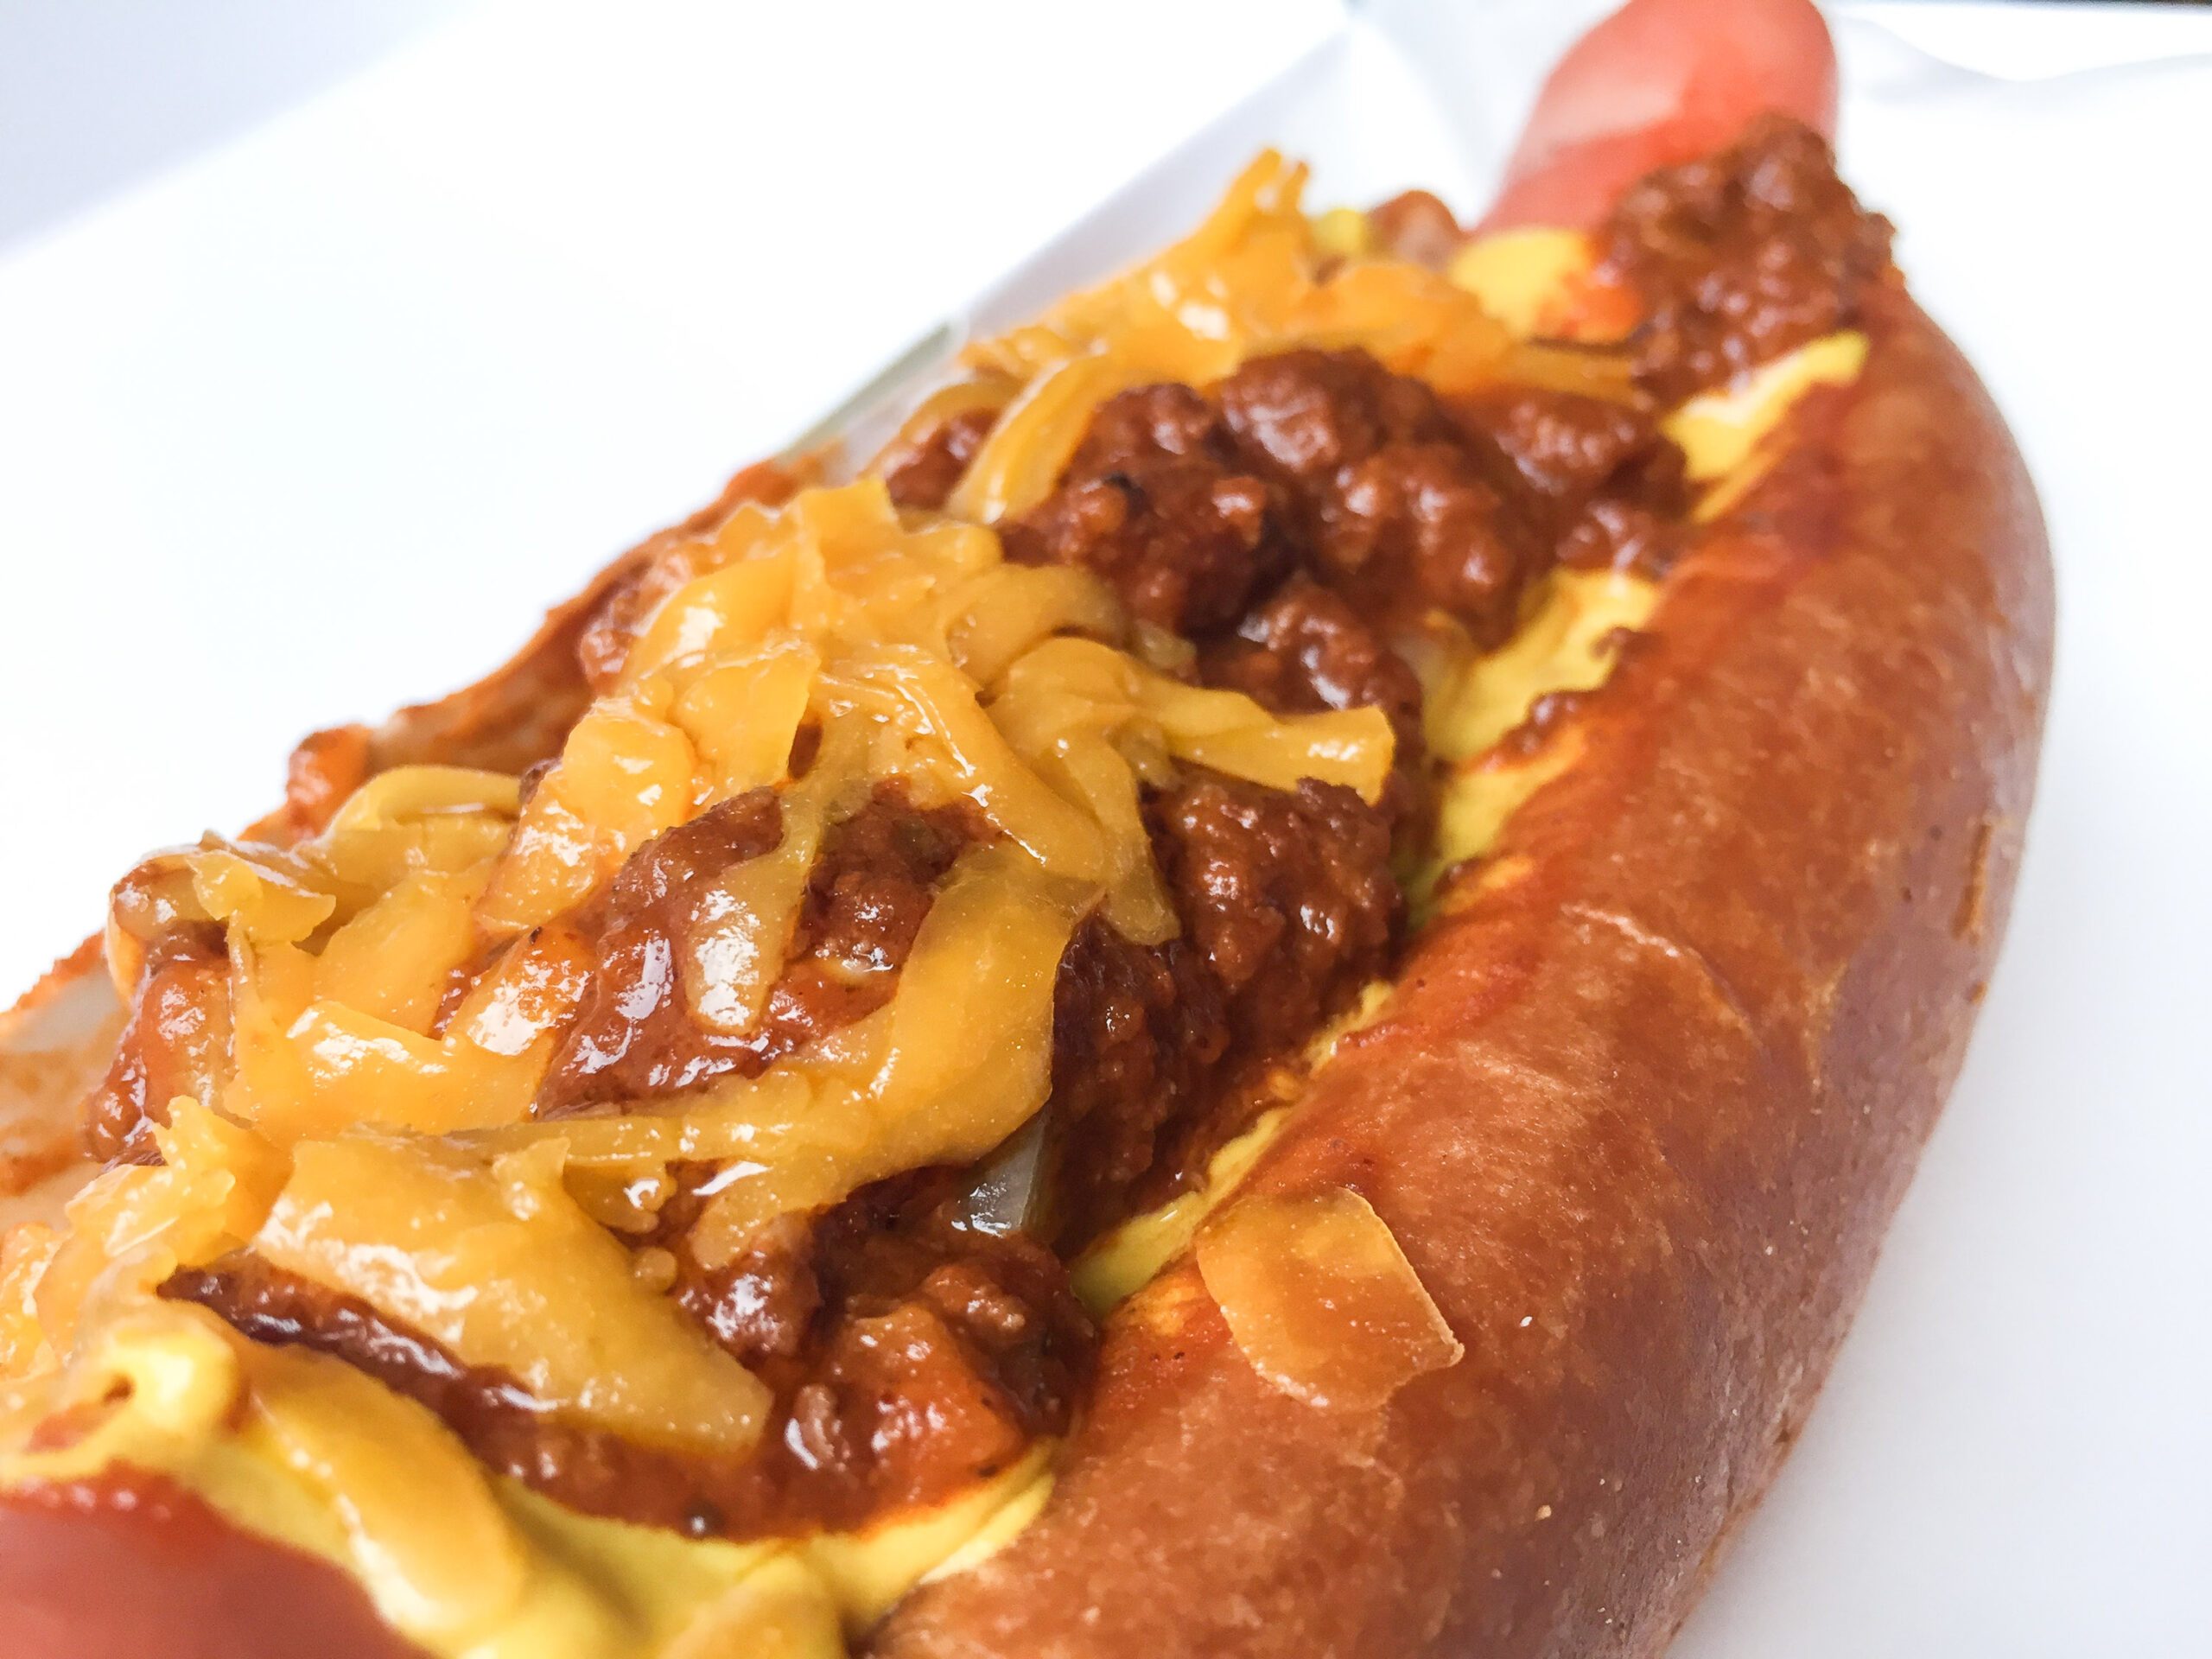 Iconic Pink’s Hot Dogs from Hollywood opens in Manila: A look at the food